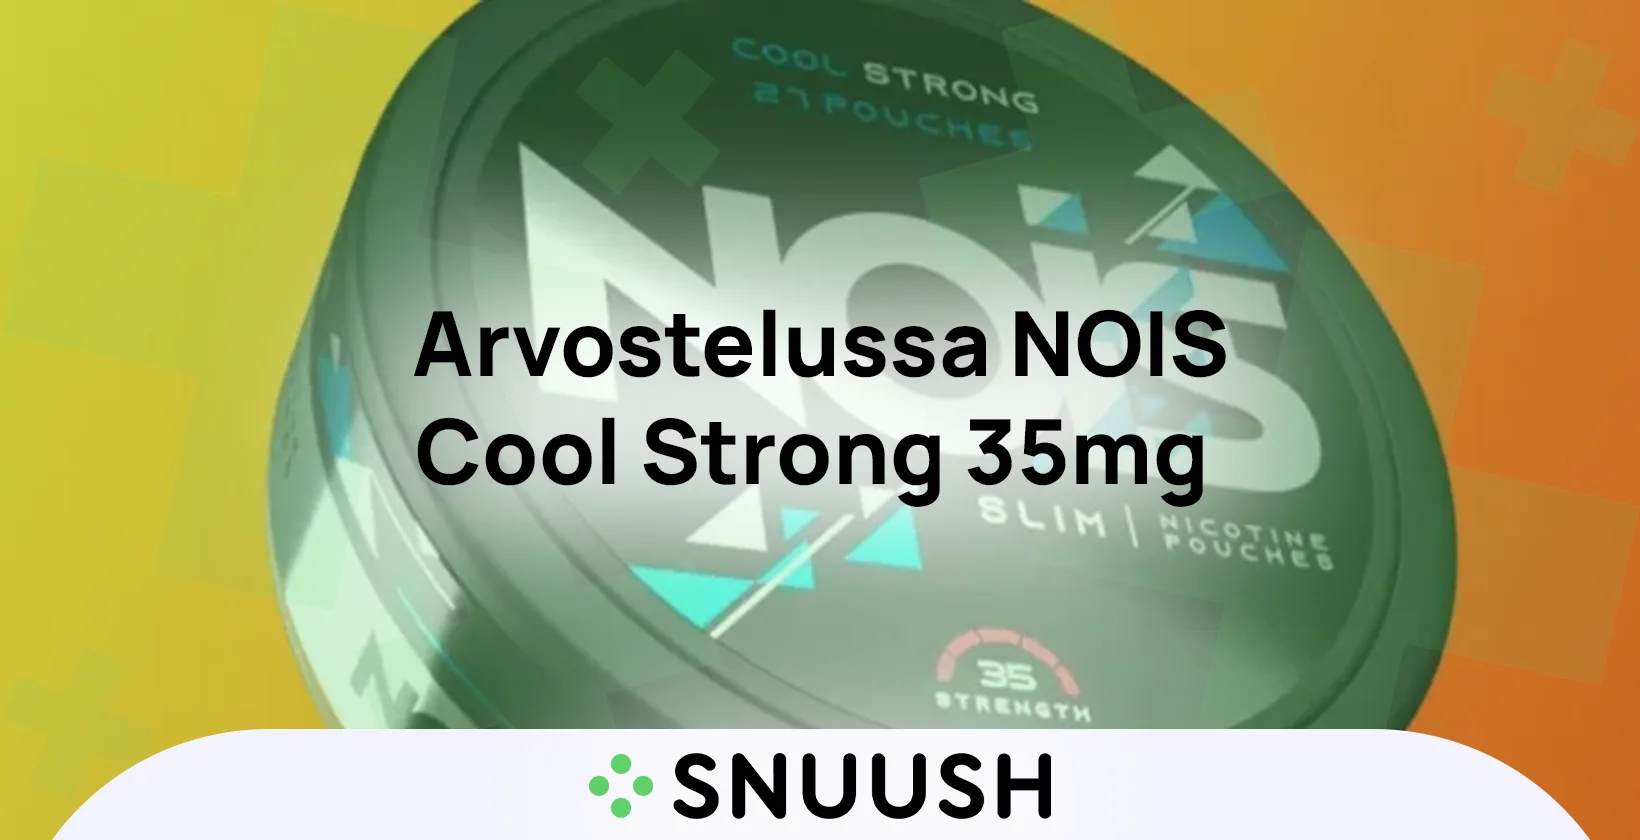 nois cool strong 35